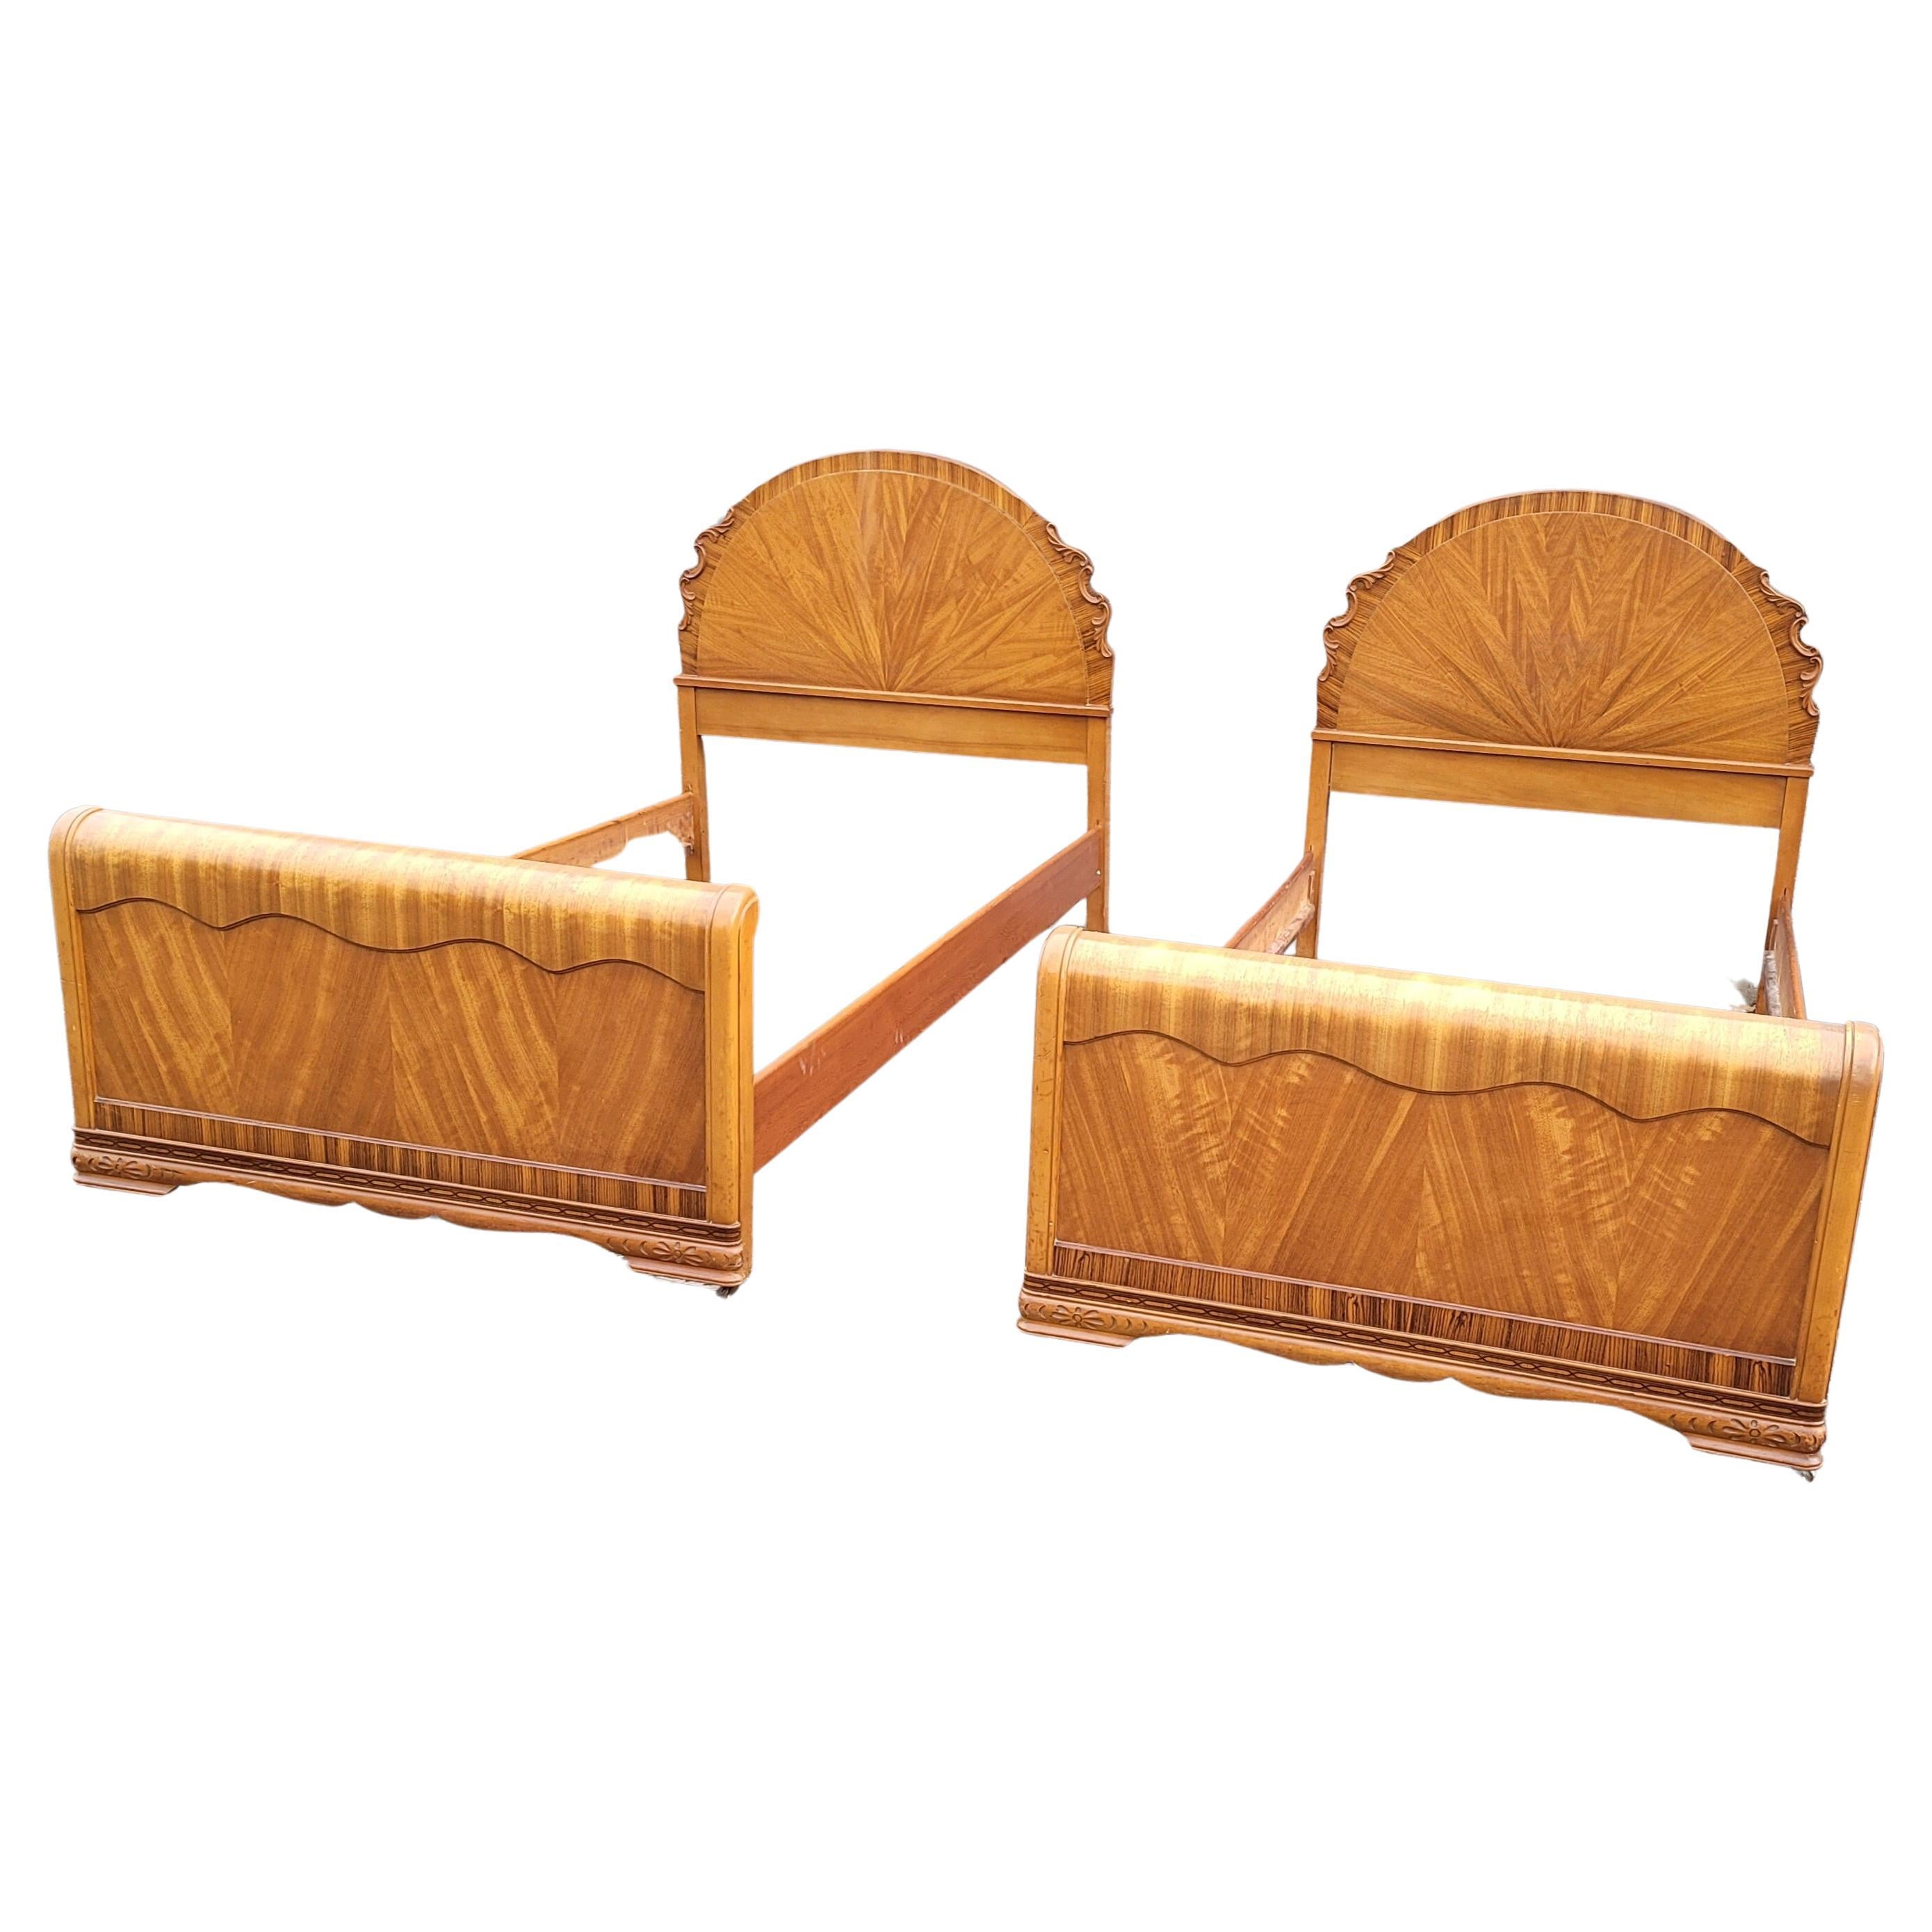 A Pair of 1930s Art Deco Mahogany Twin Size Bedsteads For Sale 1